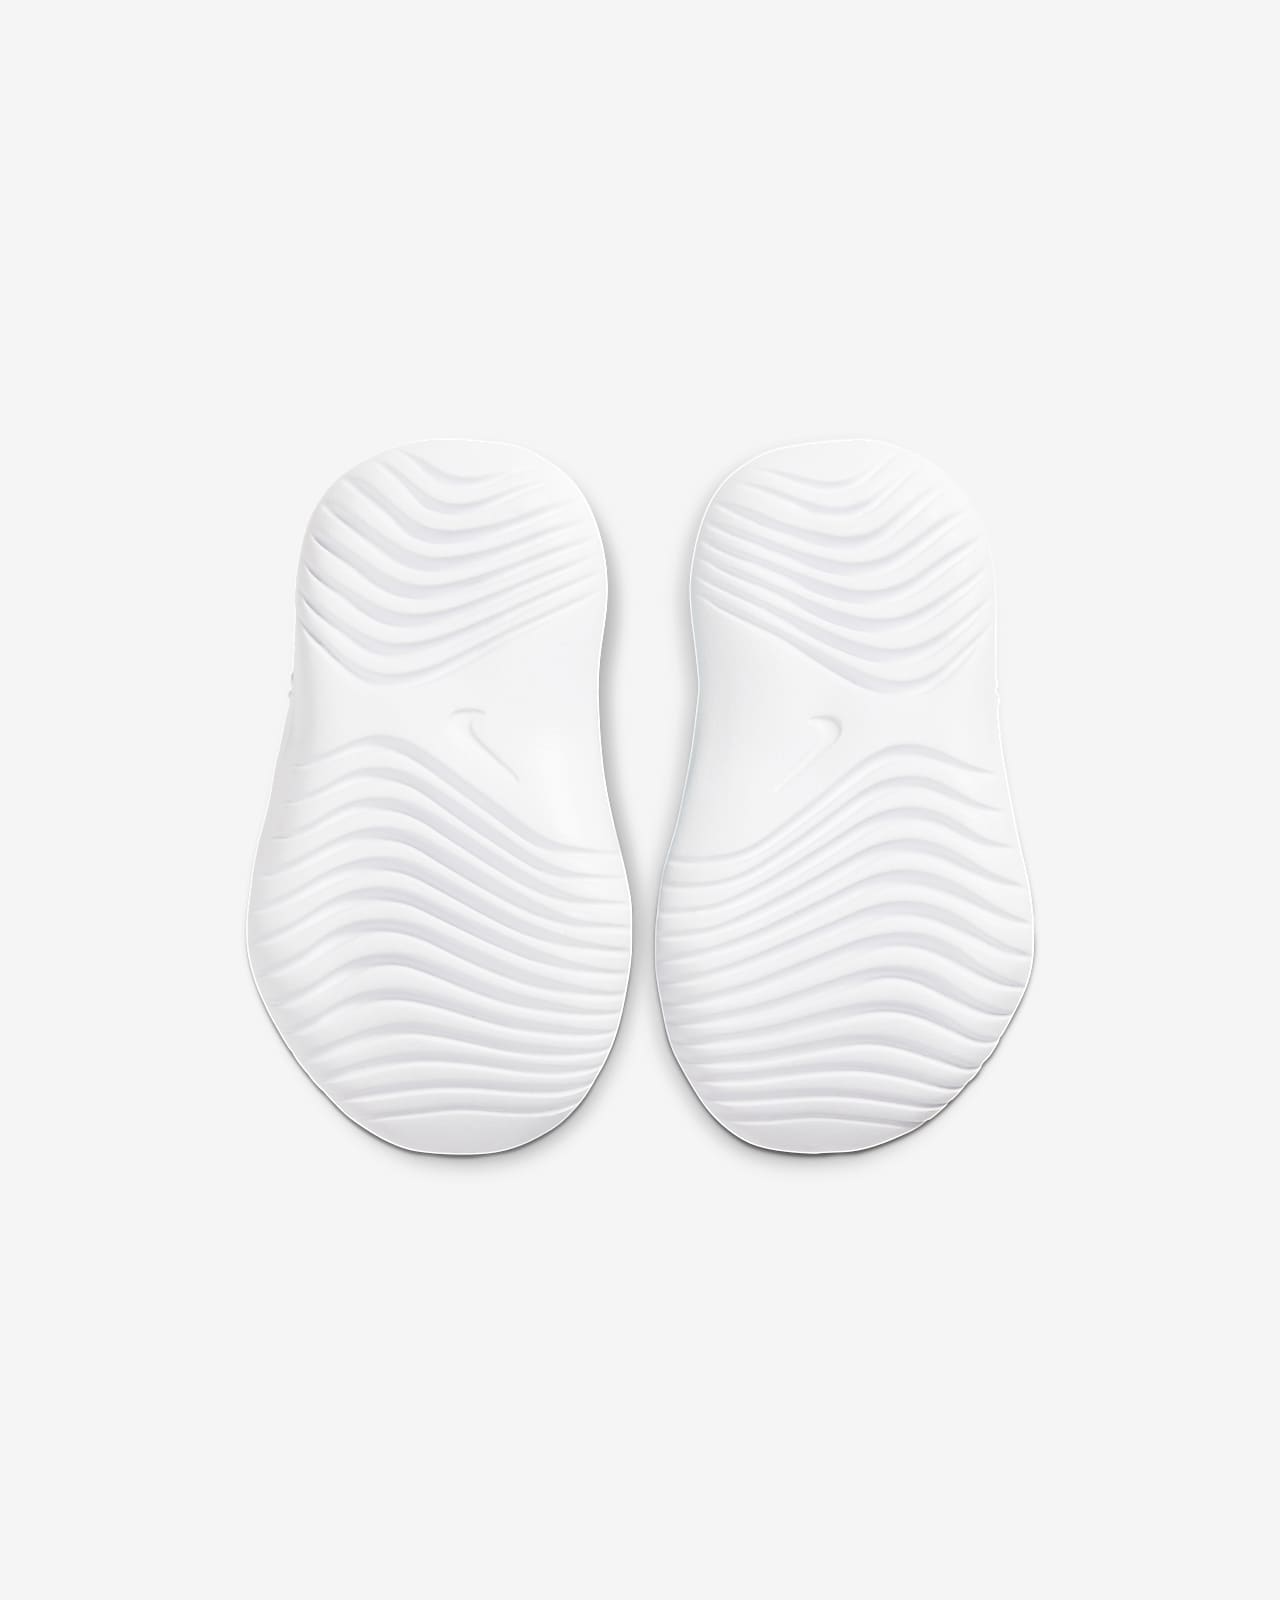 nike soft sole baby shoes